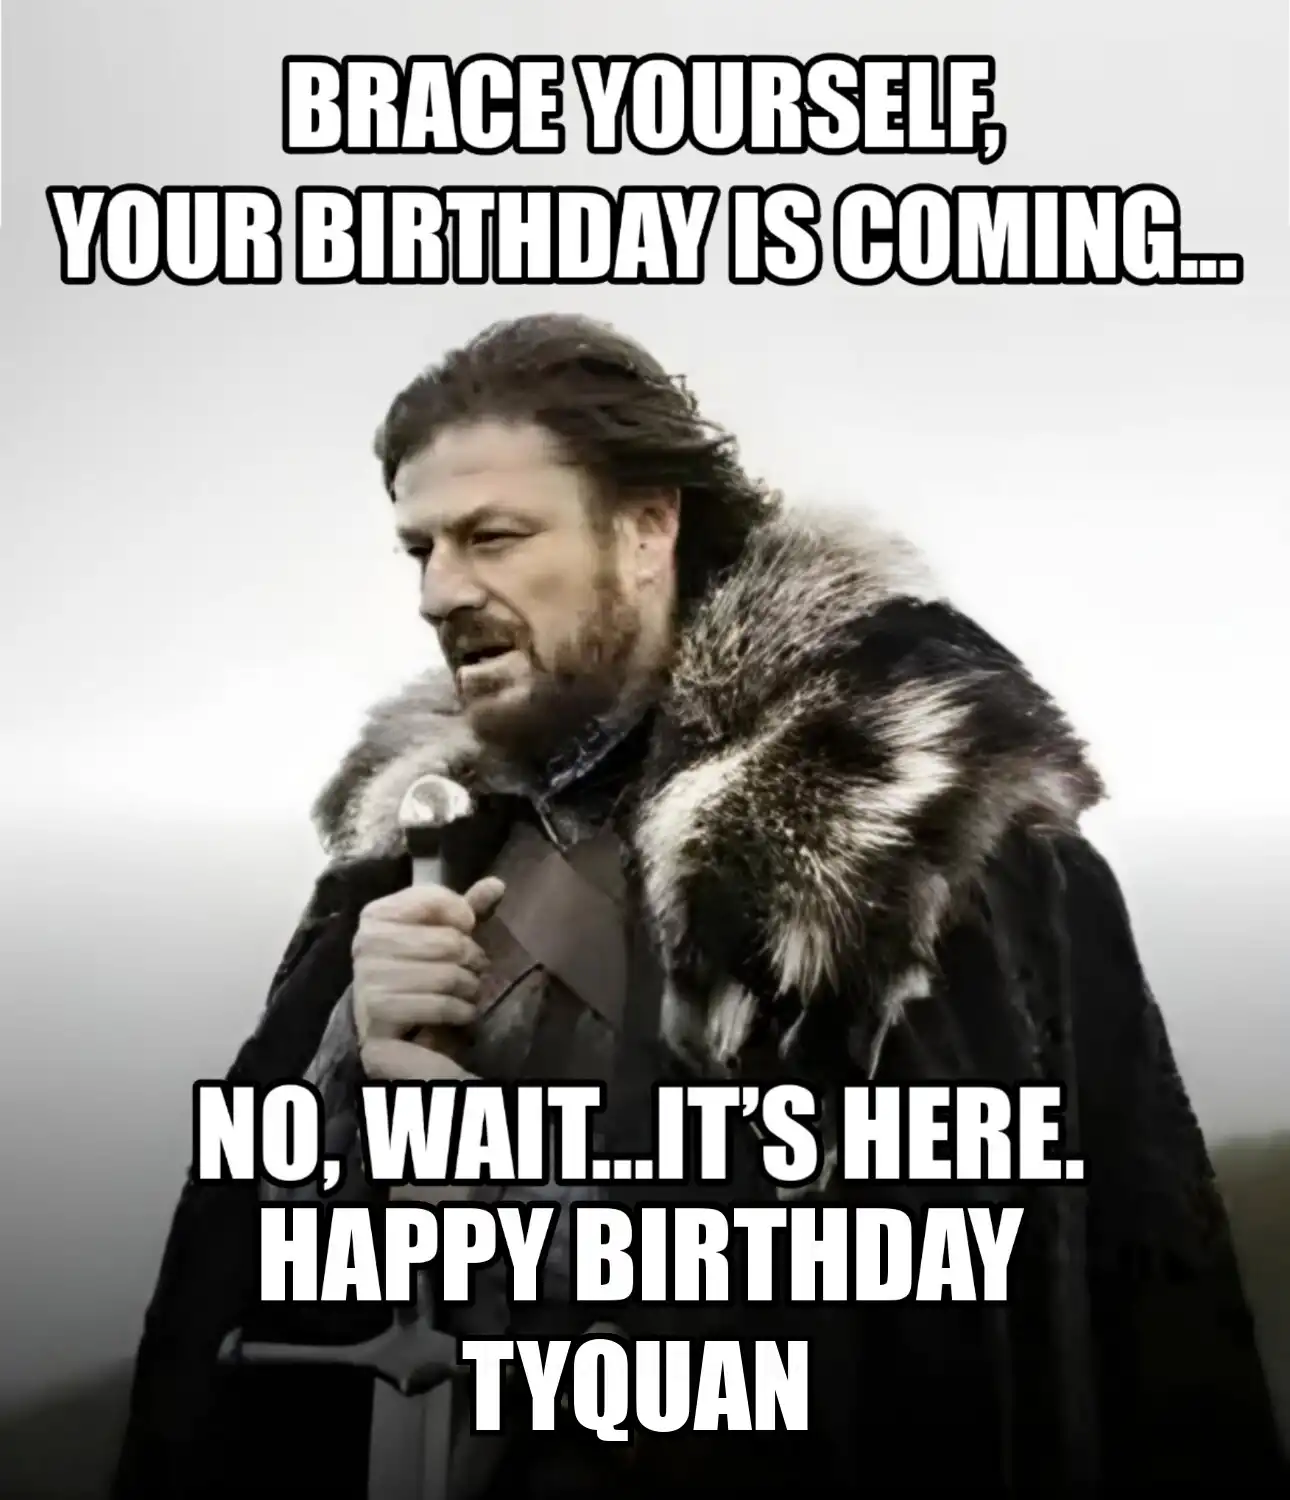 Happy Birthday Tyquan Brace Yourself Your Birthday Is Coming Meme